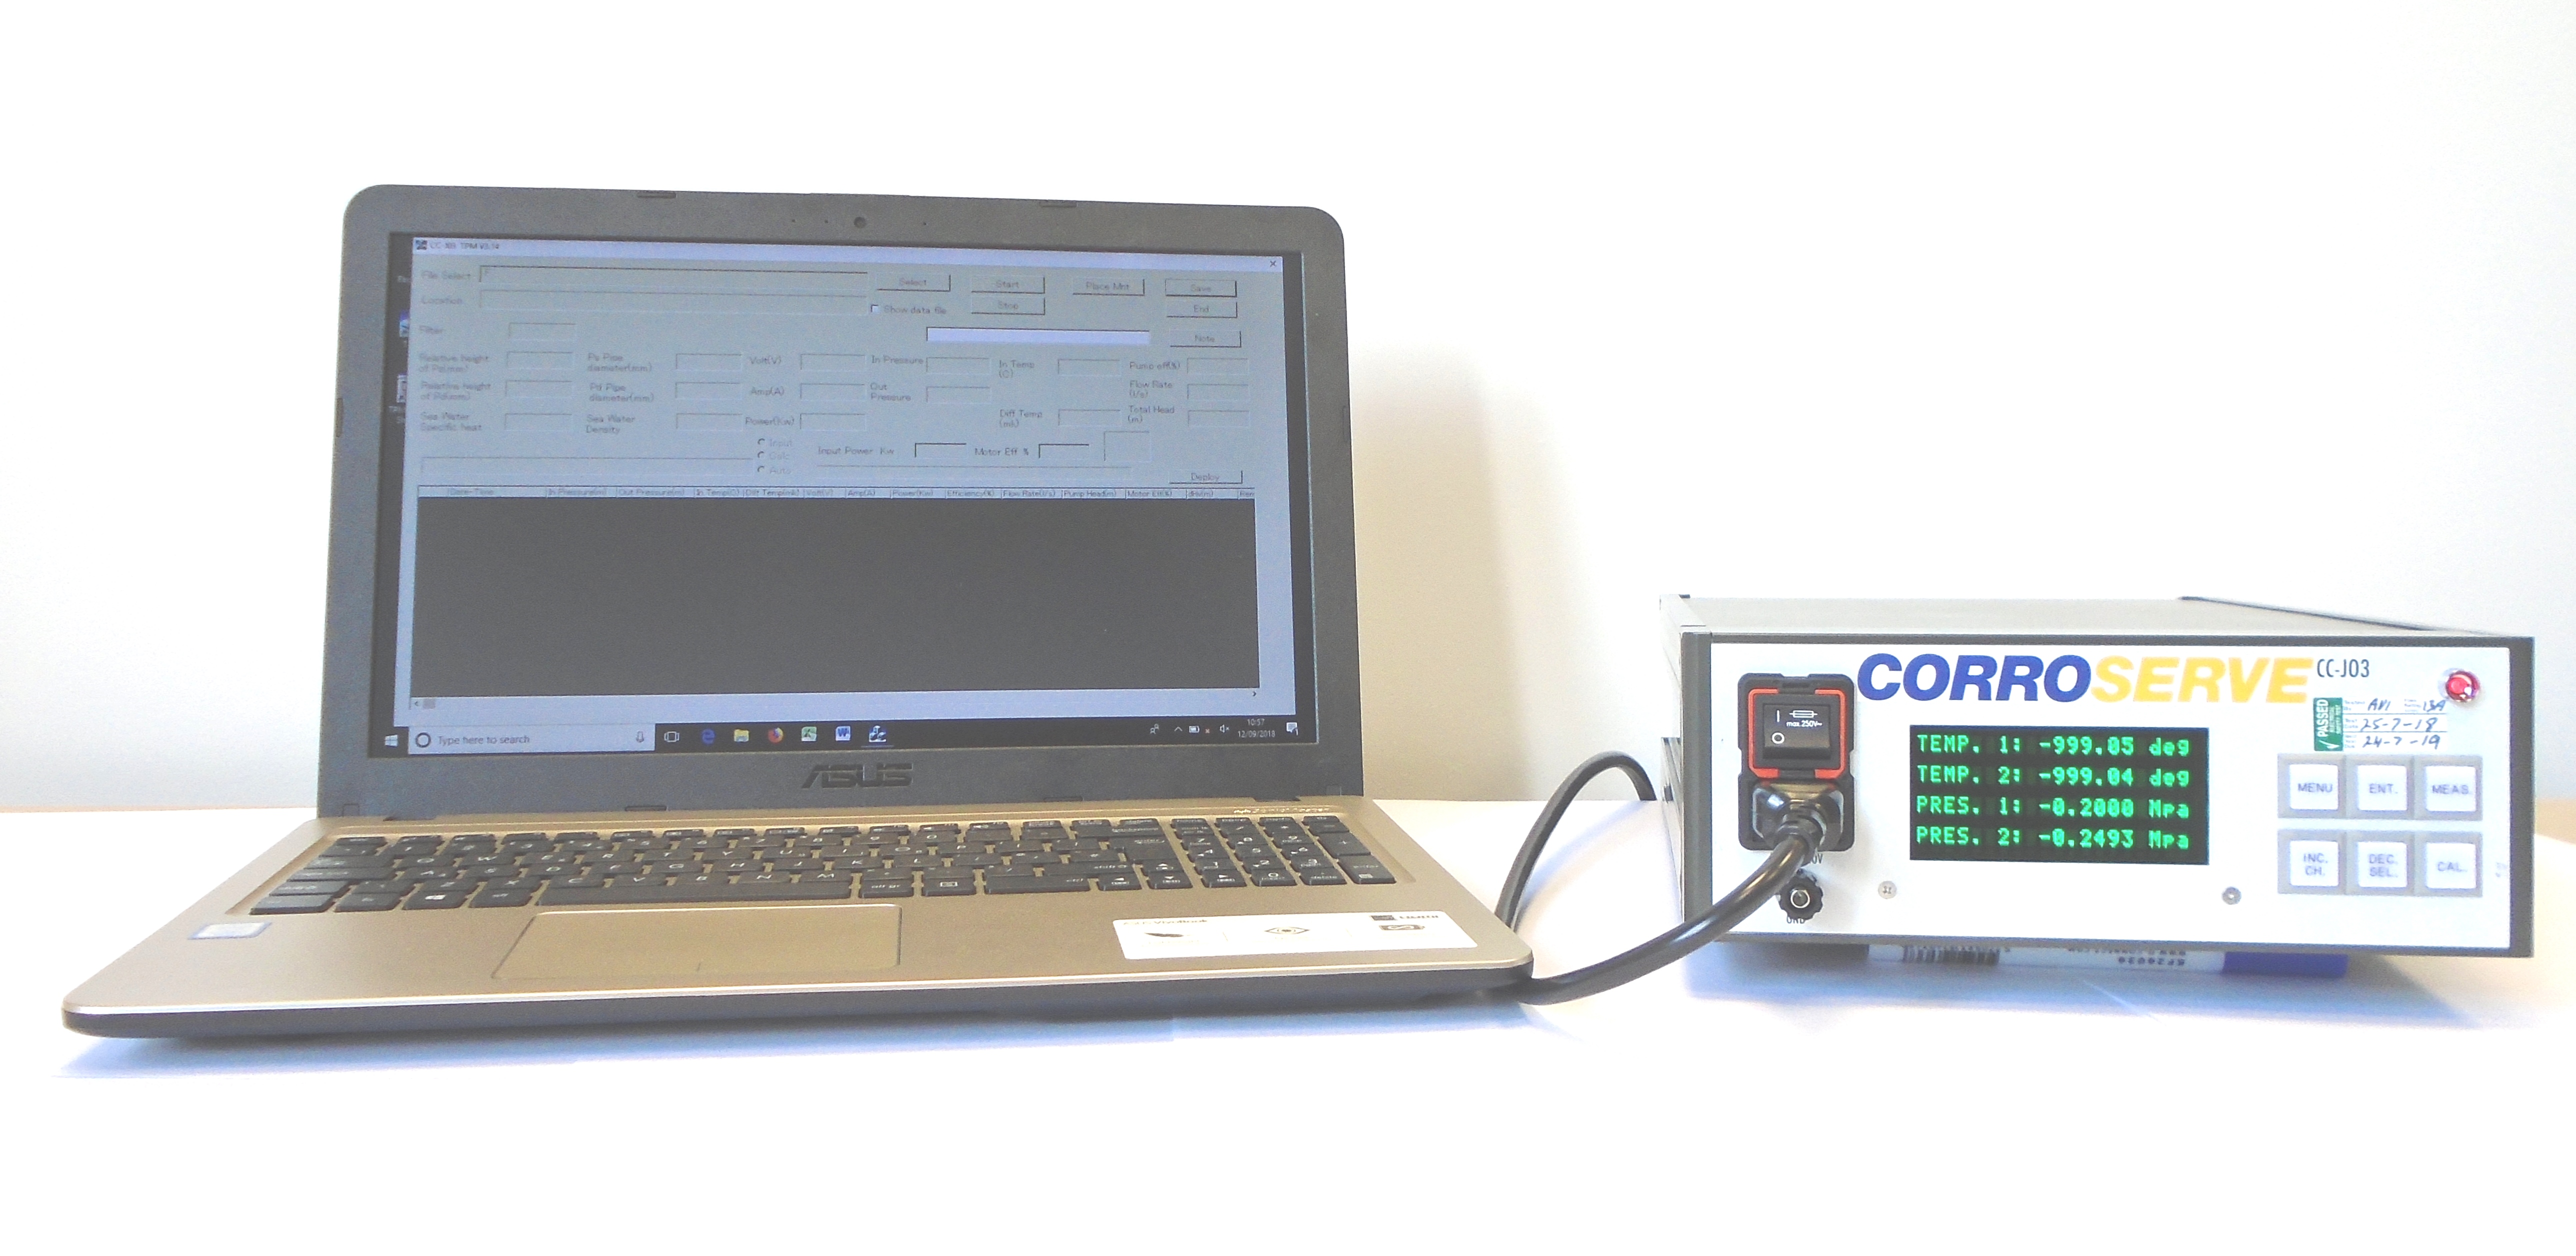 Corroserve’s Thermodynamic Pump Monitoring system allows it to monitor the performance of any Class C industrial pump.